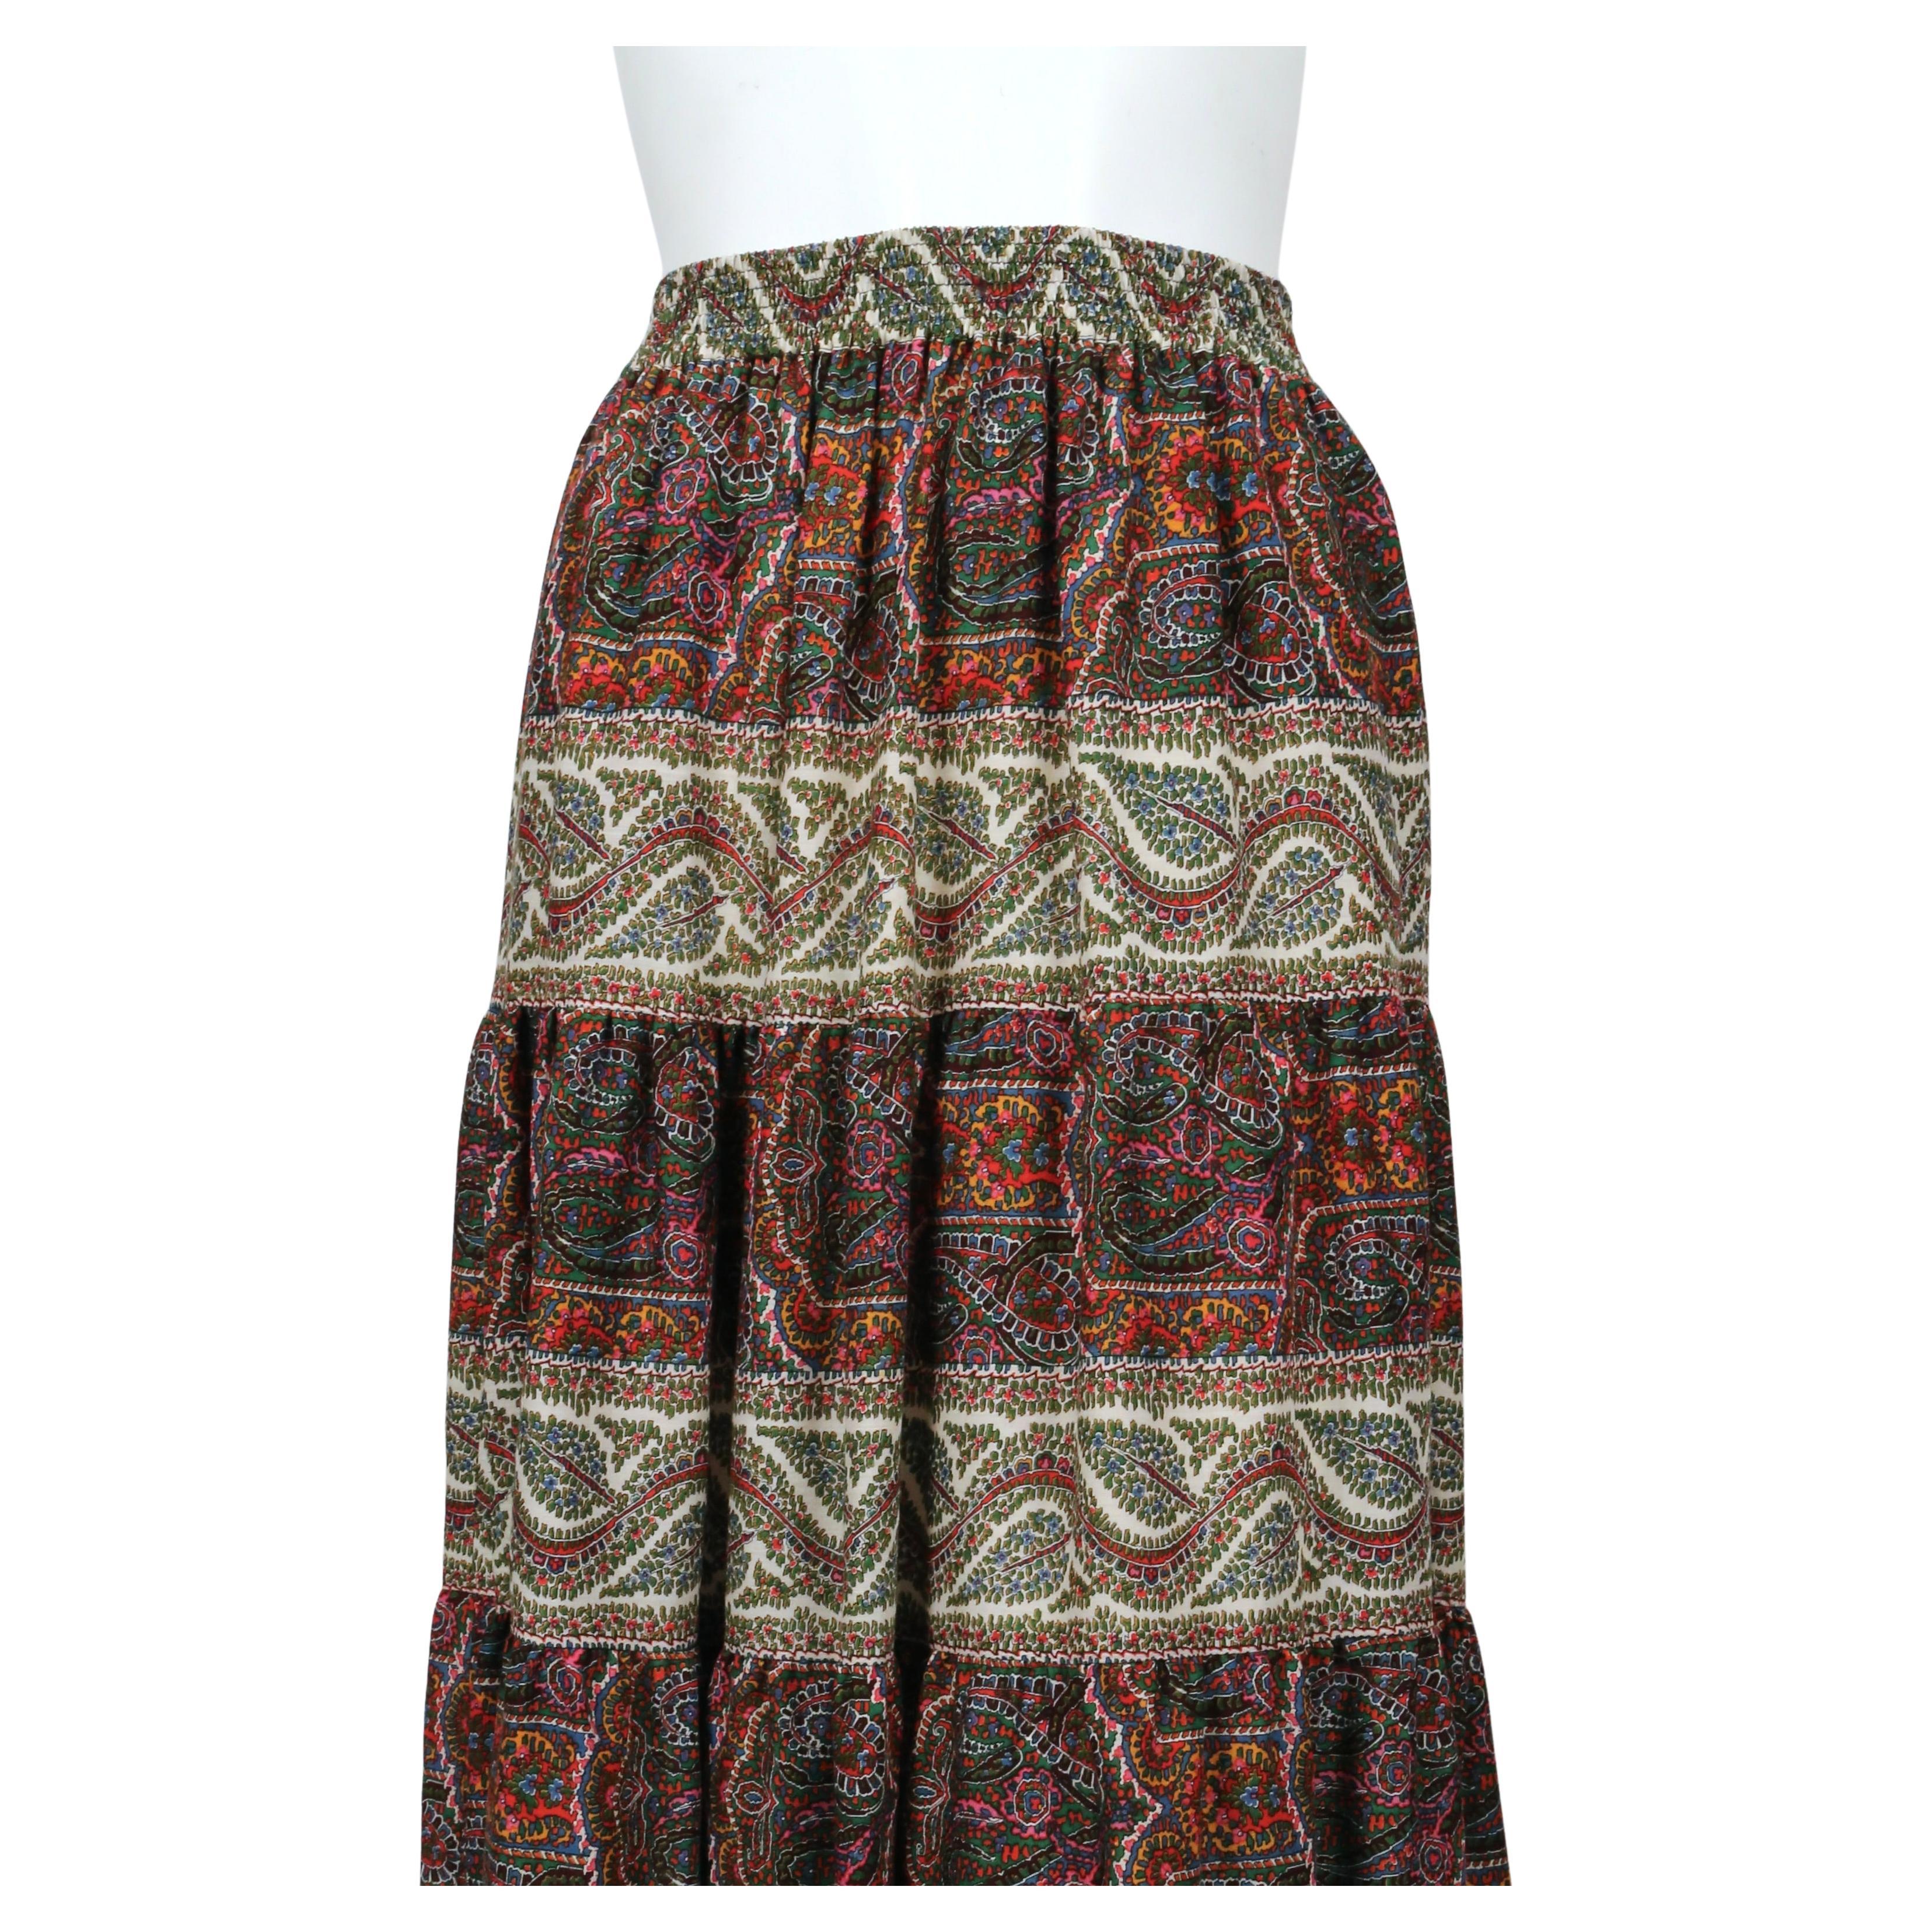 Floral and paisley printed wool challis tiered skirt designed by Yves Saint Laurent dating to 1977 as seen in the Saint Laurent fall ad campaign. Skirt is labeled a French size 34 however it does have an elastic waist. Approximate measurements: